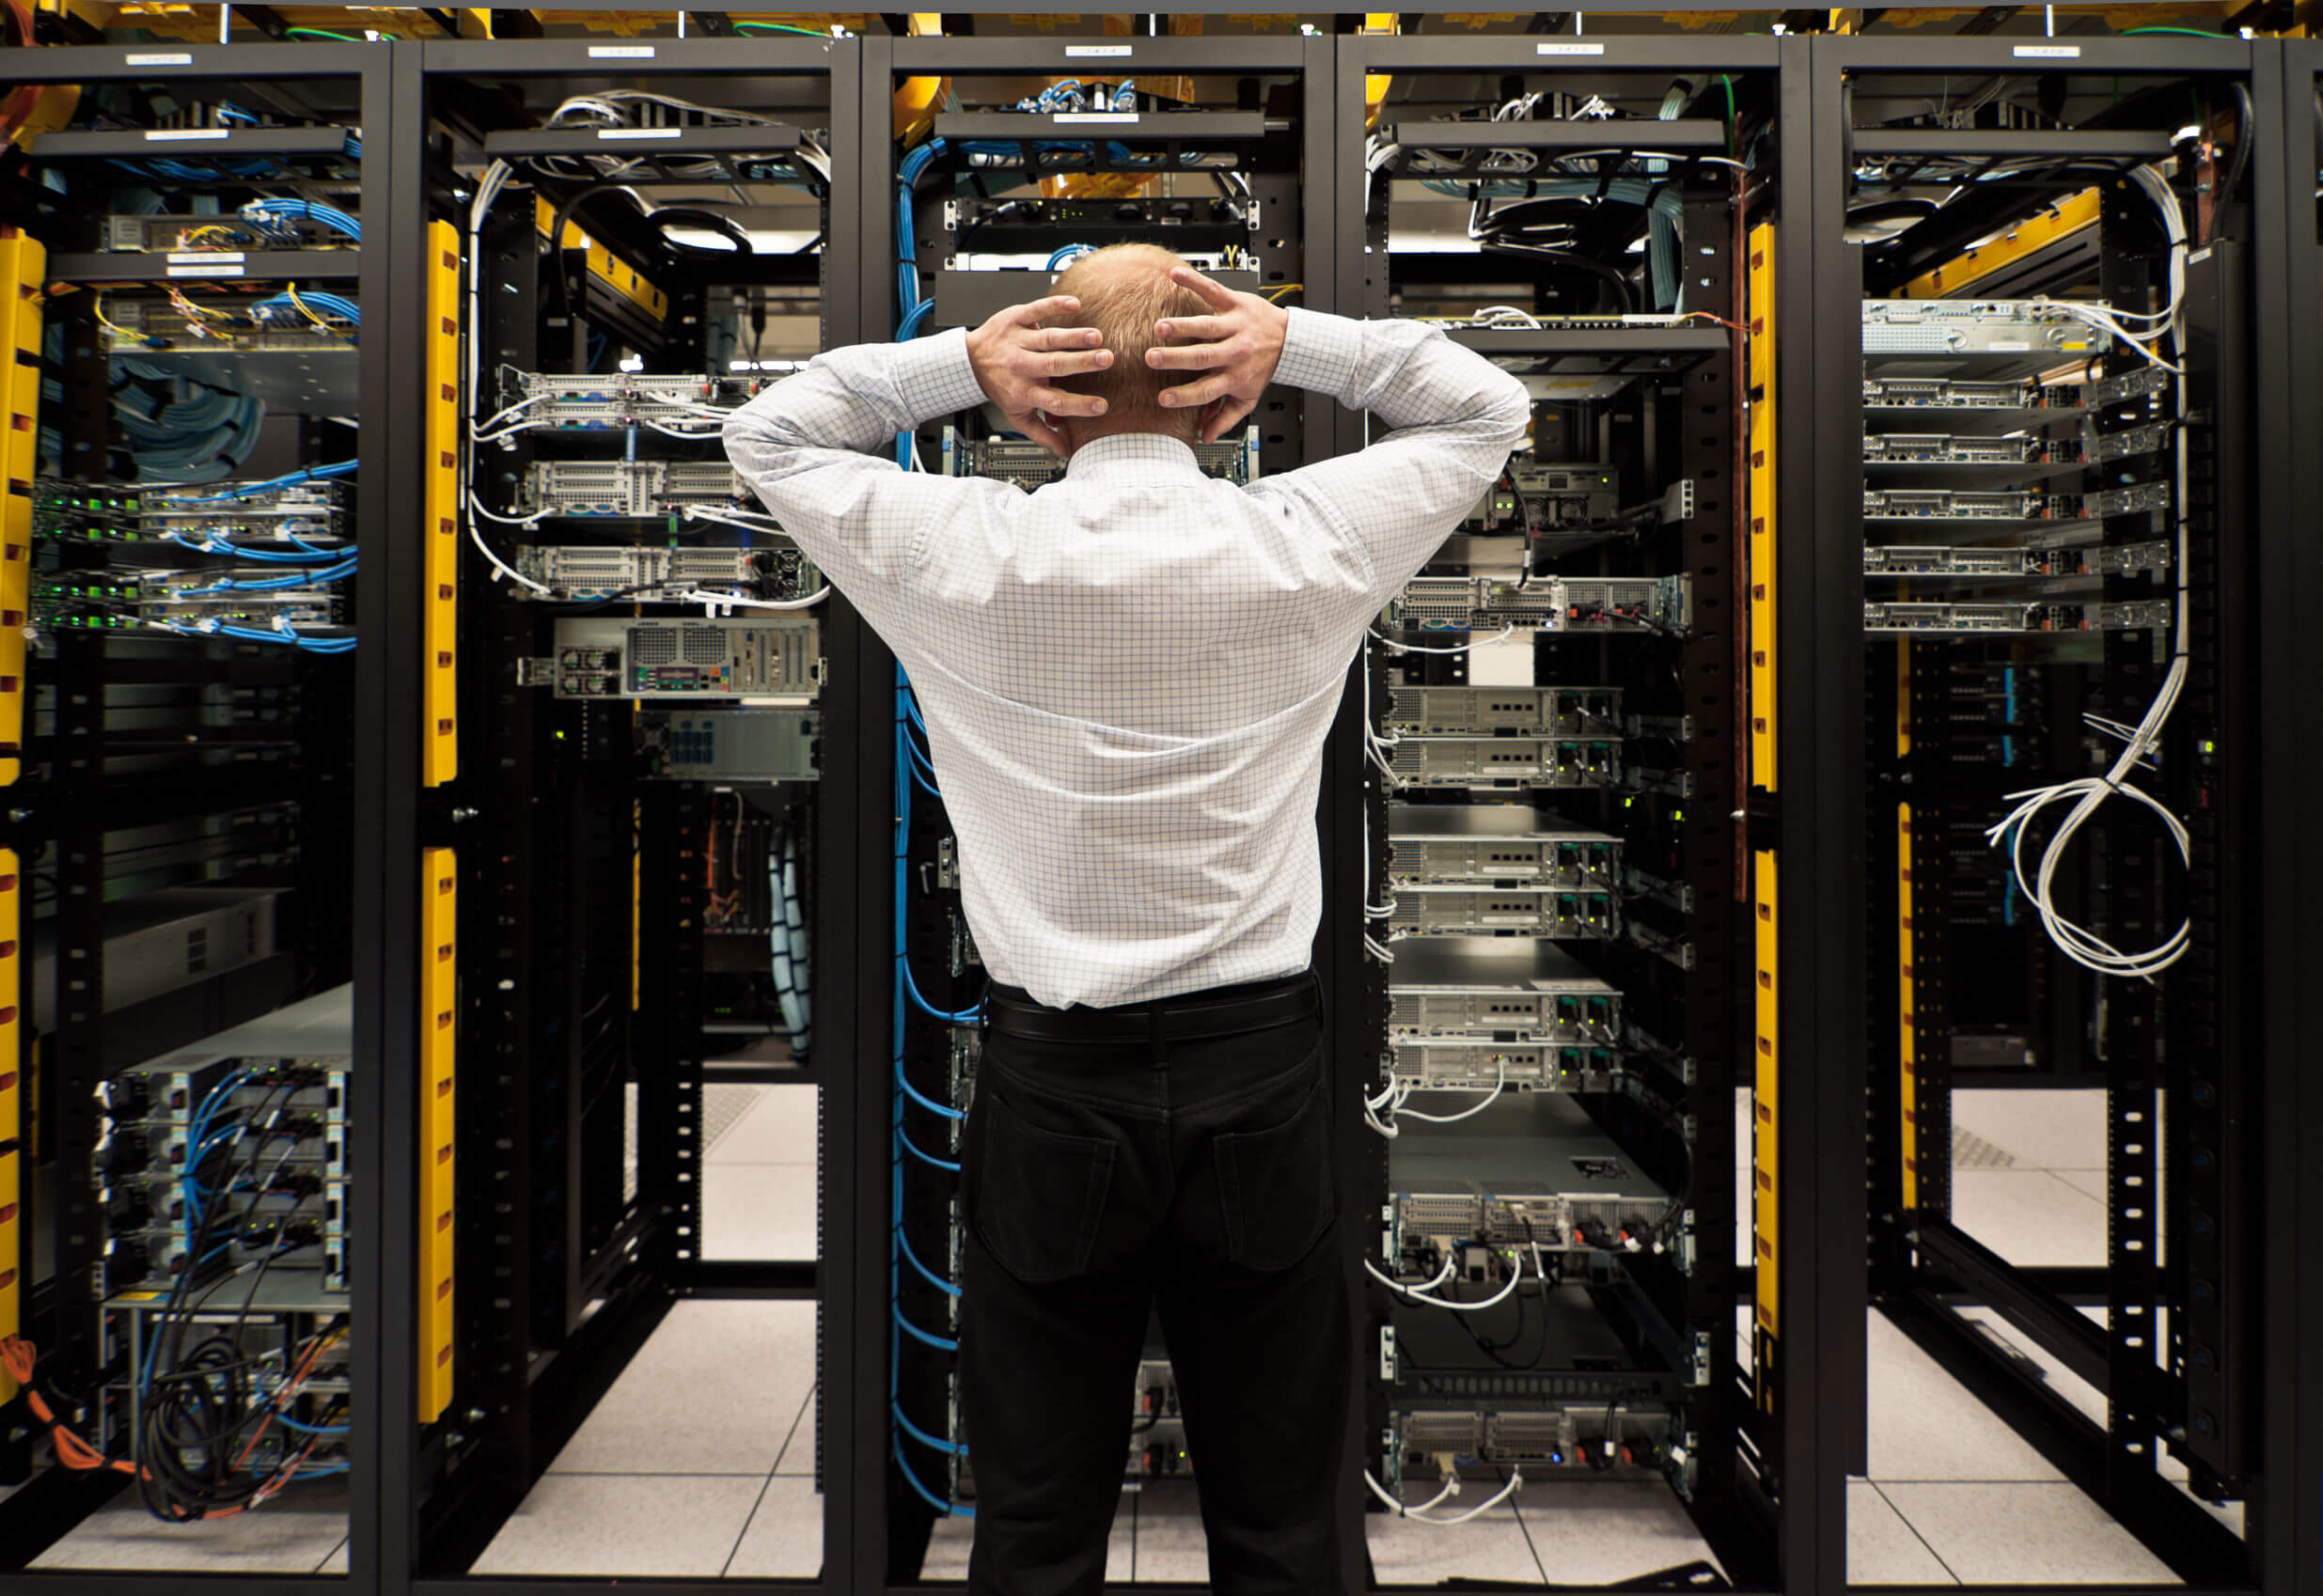 A man staring at a rack of servers